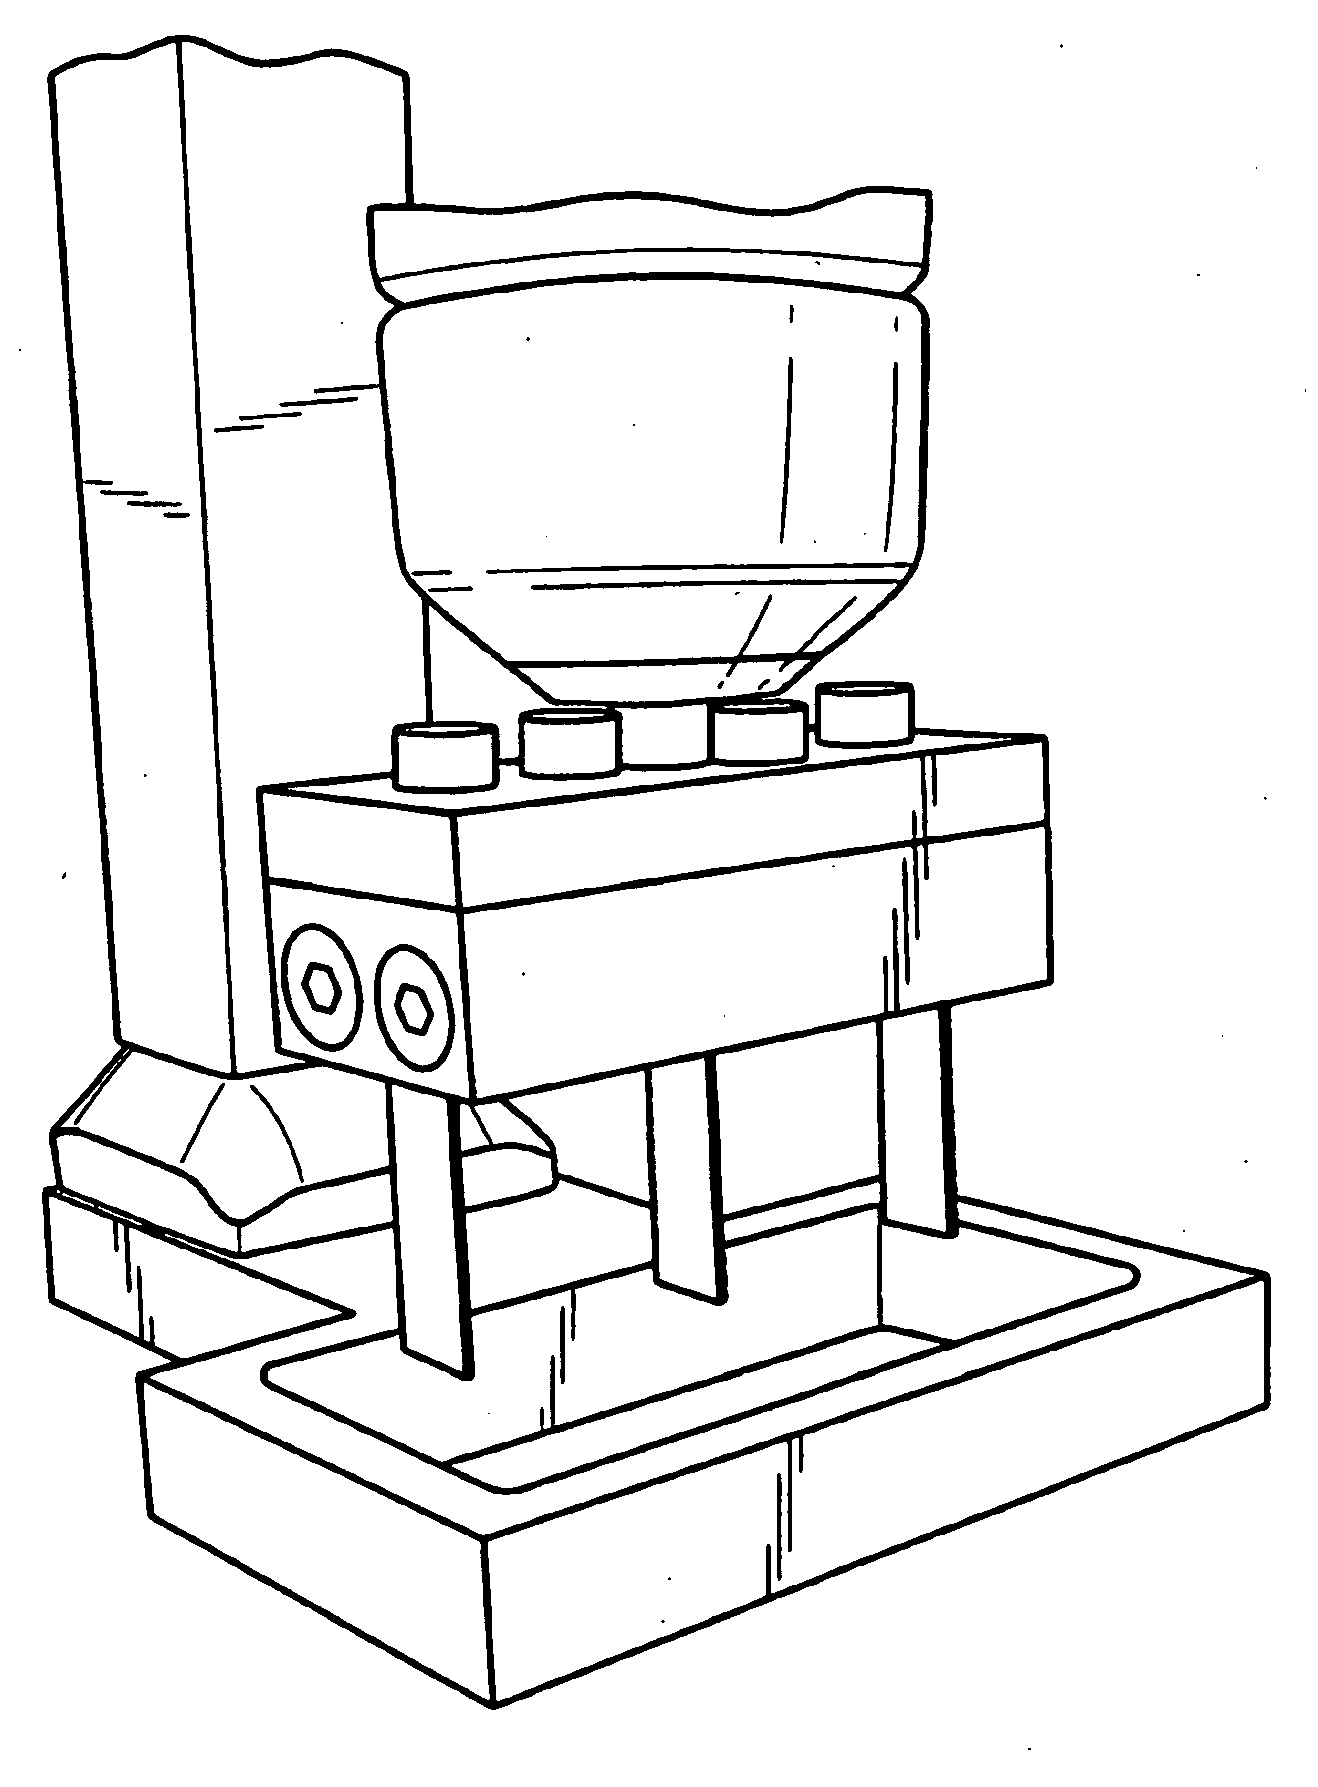 Apparatus and Method for Predicting Meat Tenderness